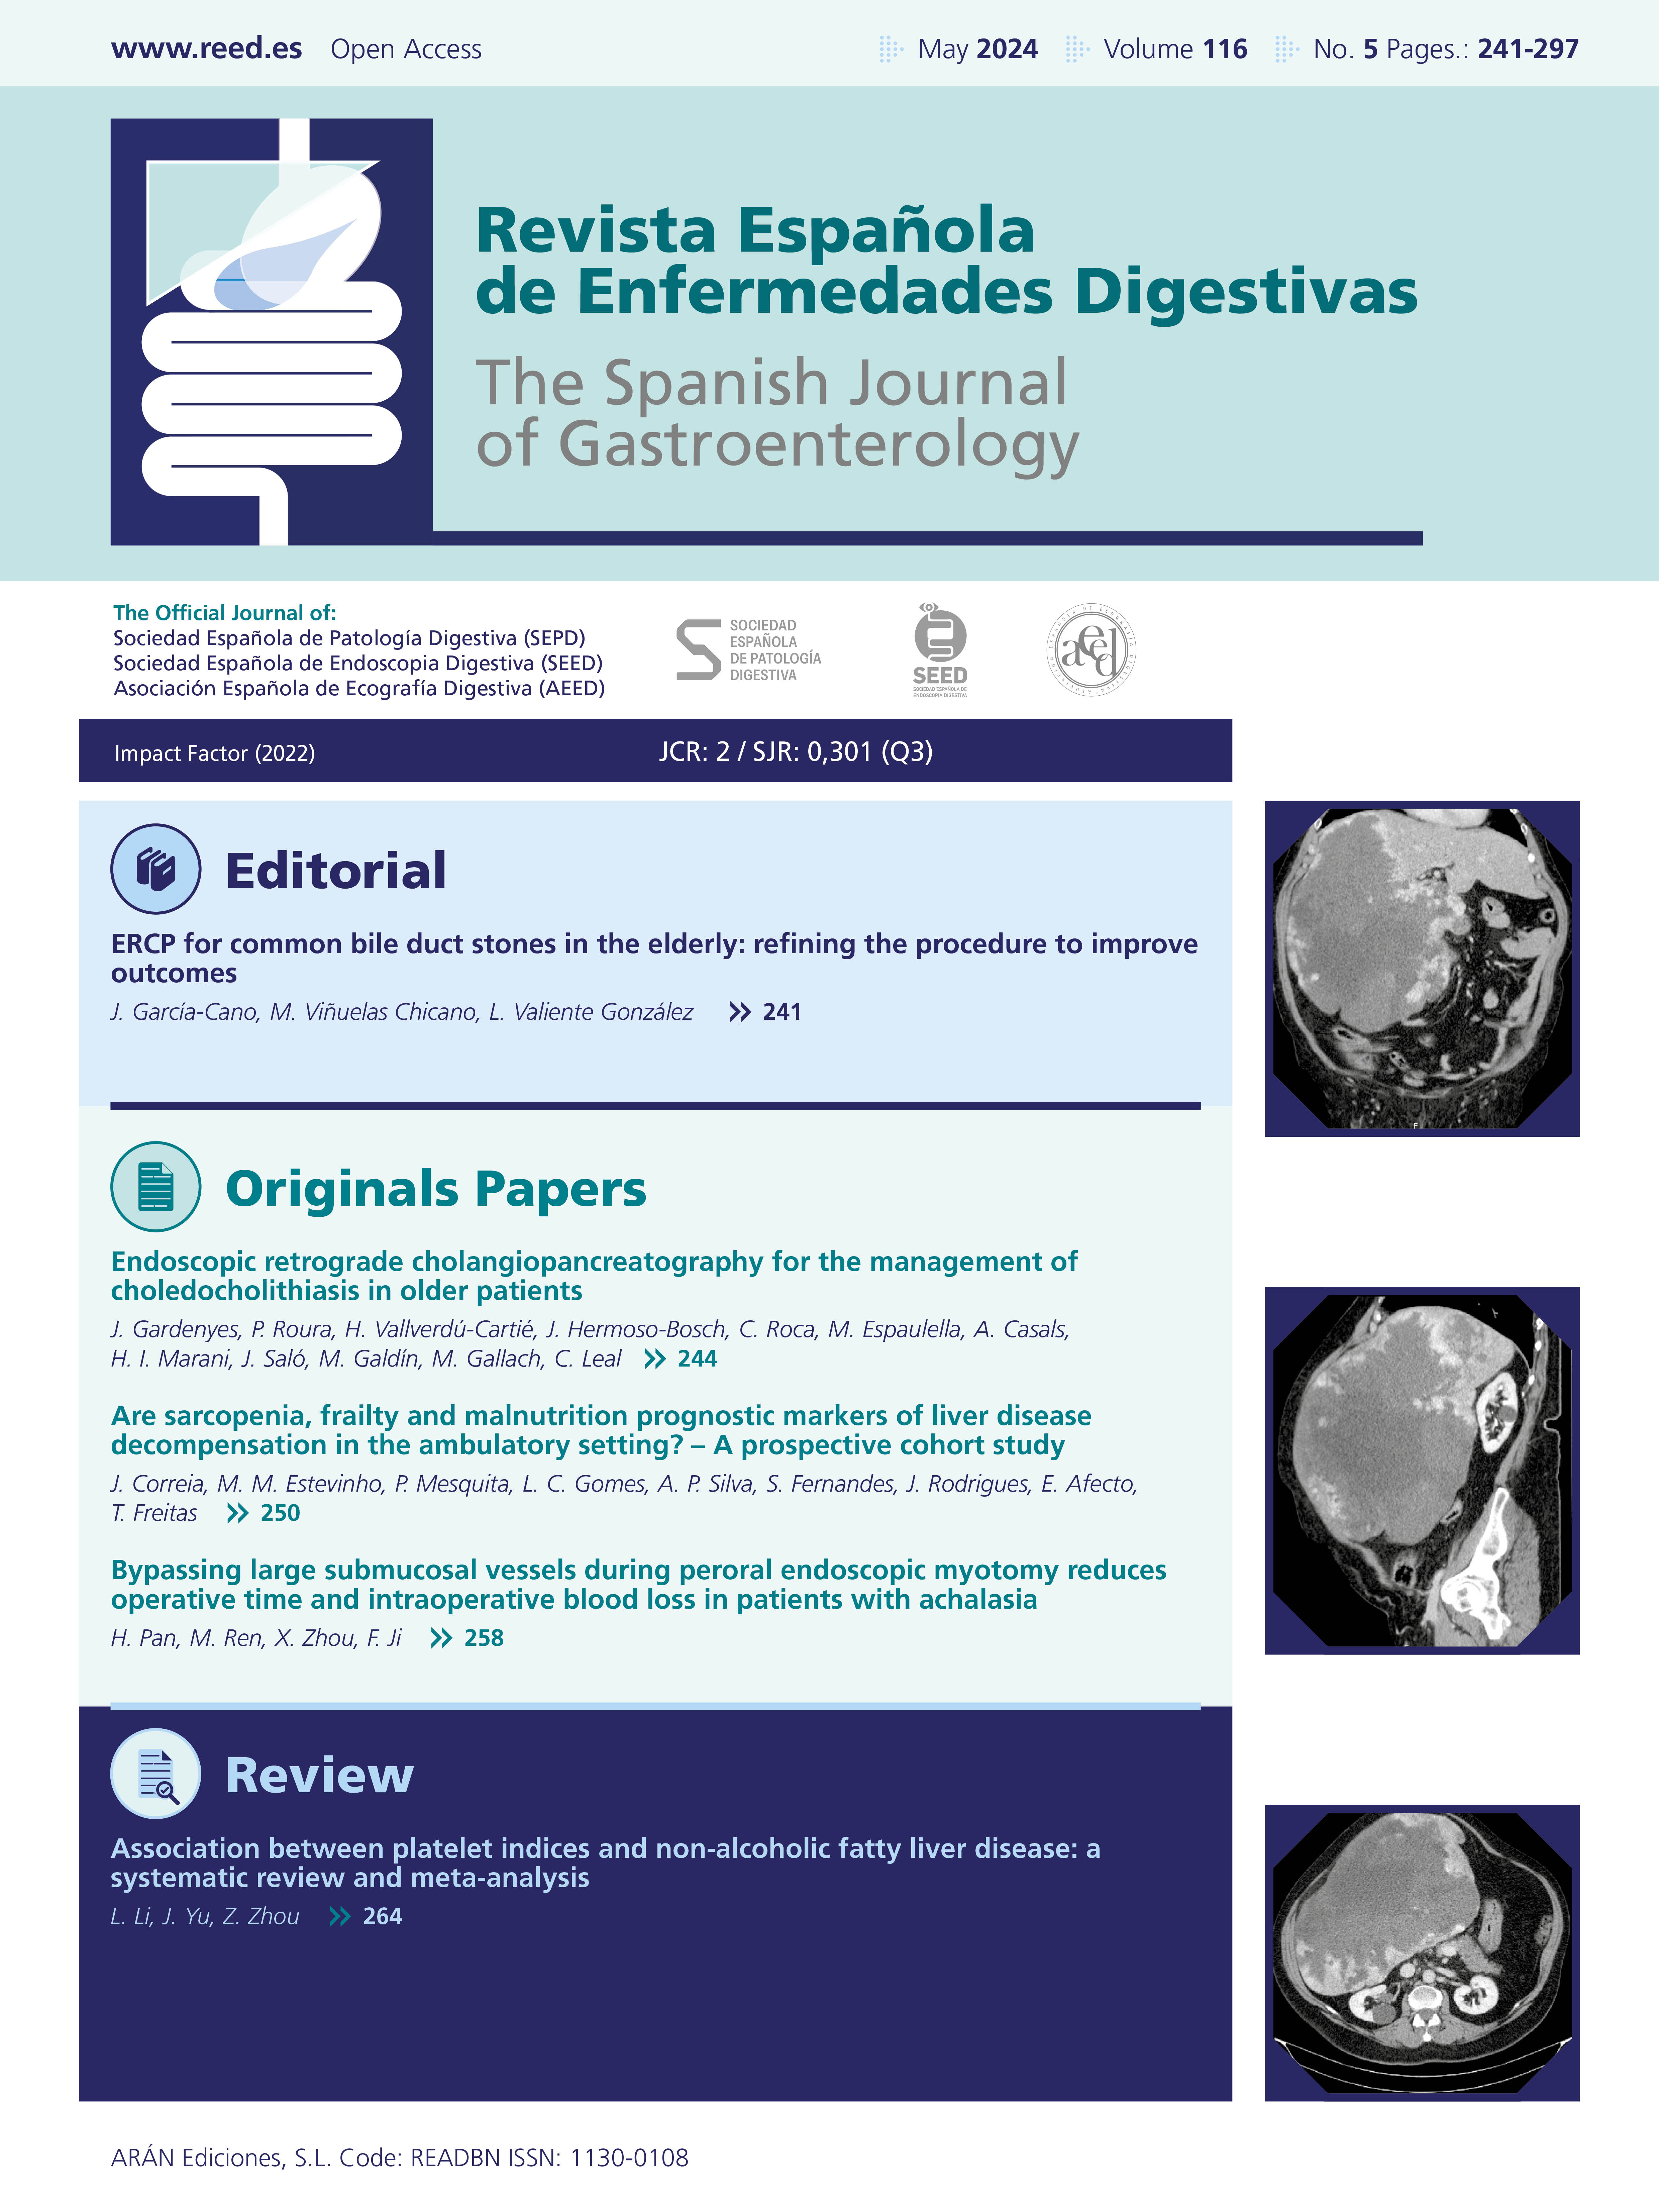 Publications - Current issue